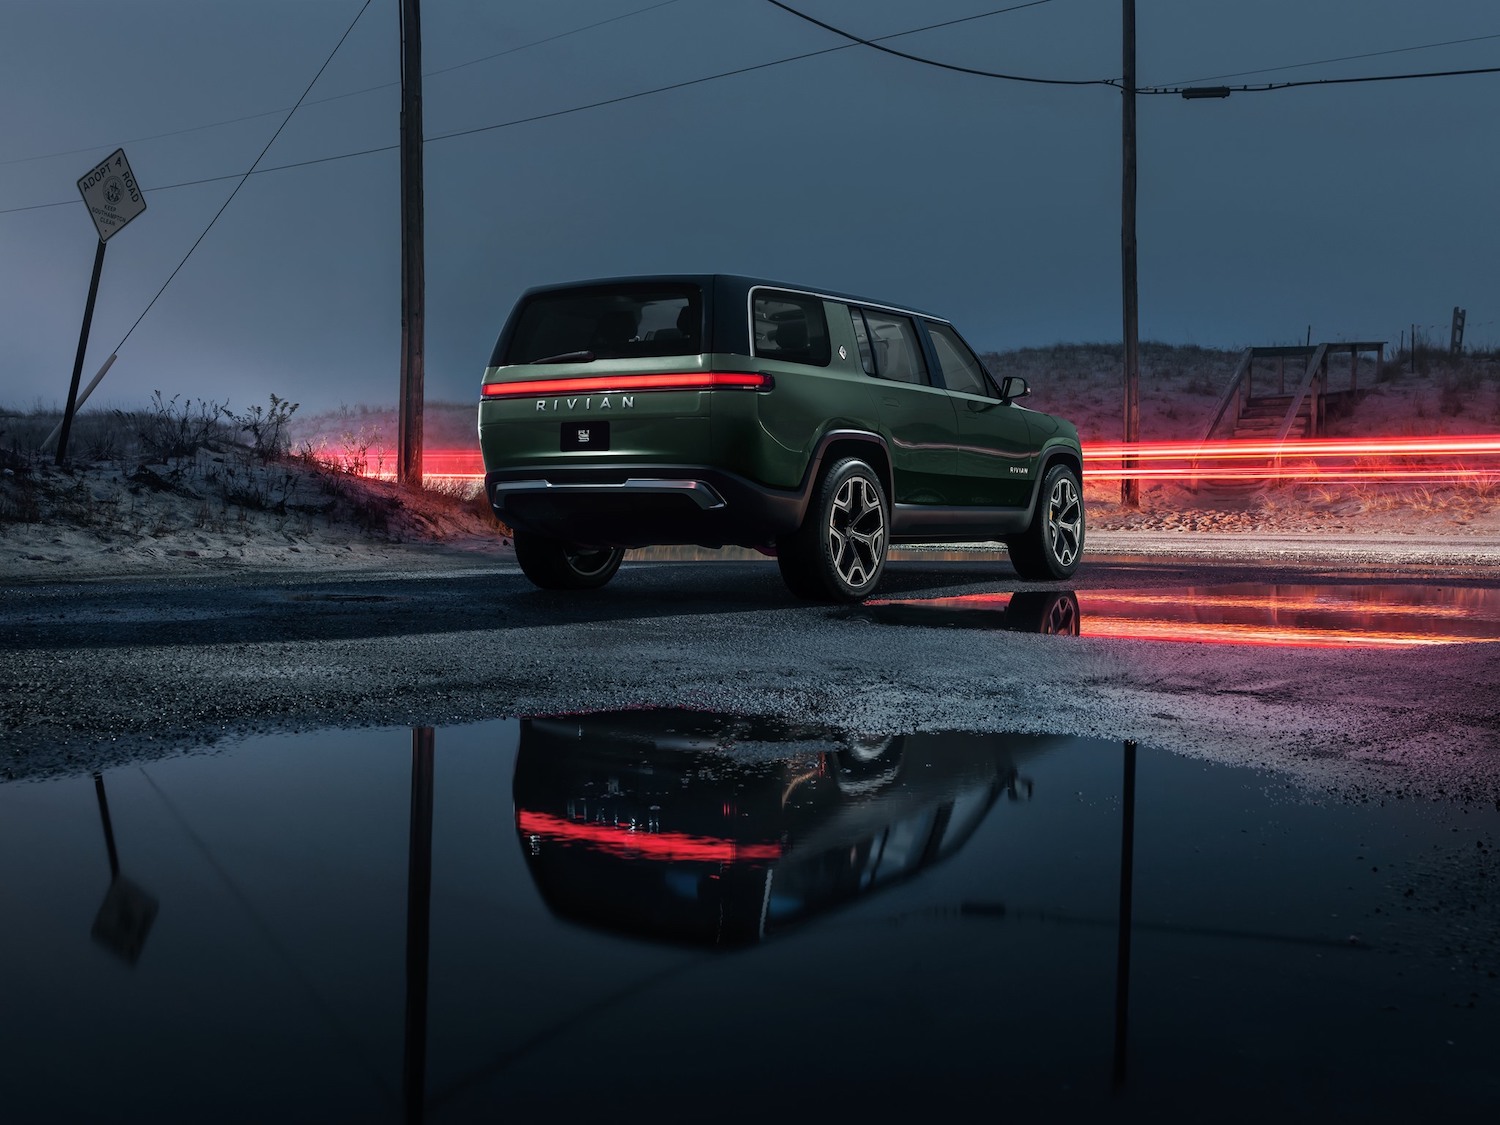 Promo photo of a green Rivian SUV EV parked next to a road, tail lights visible in the background.